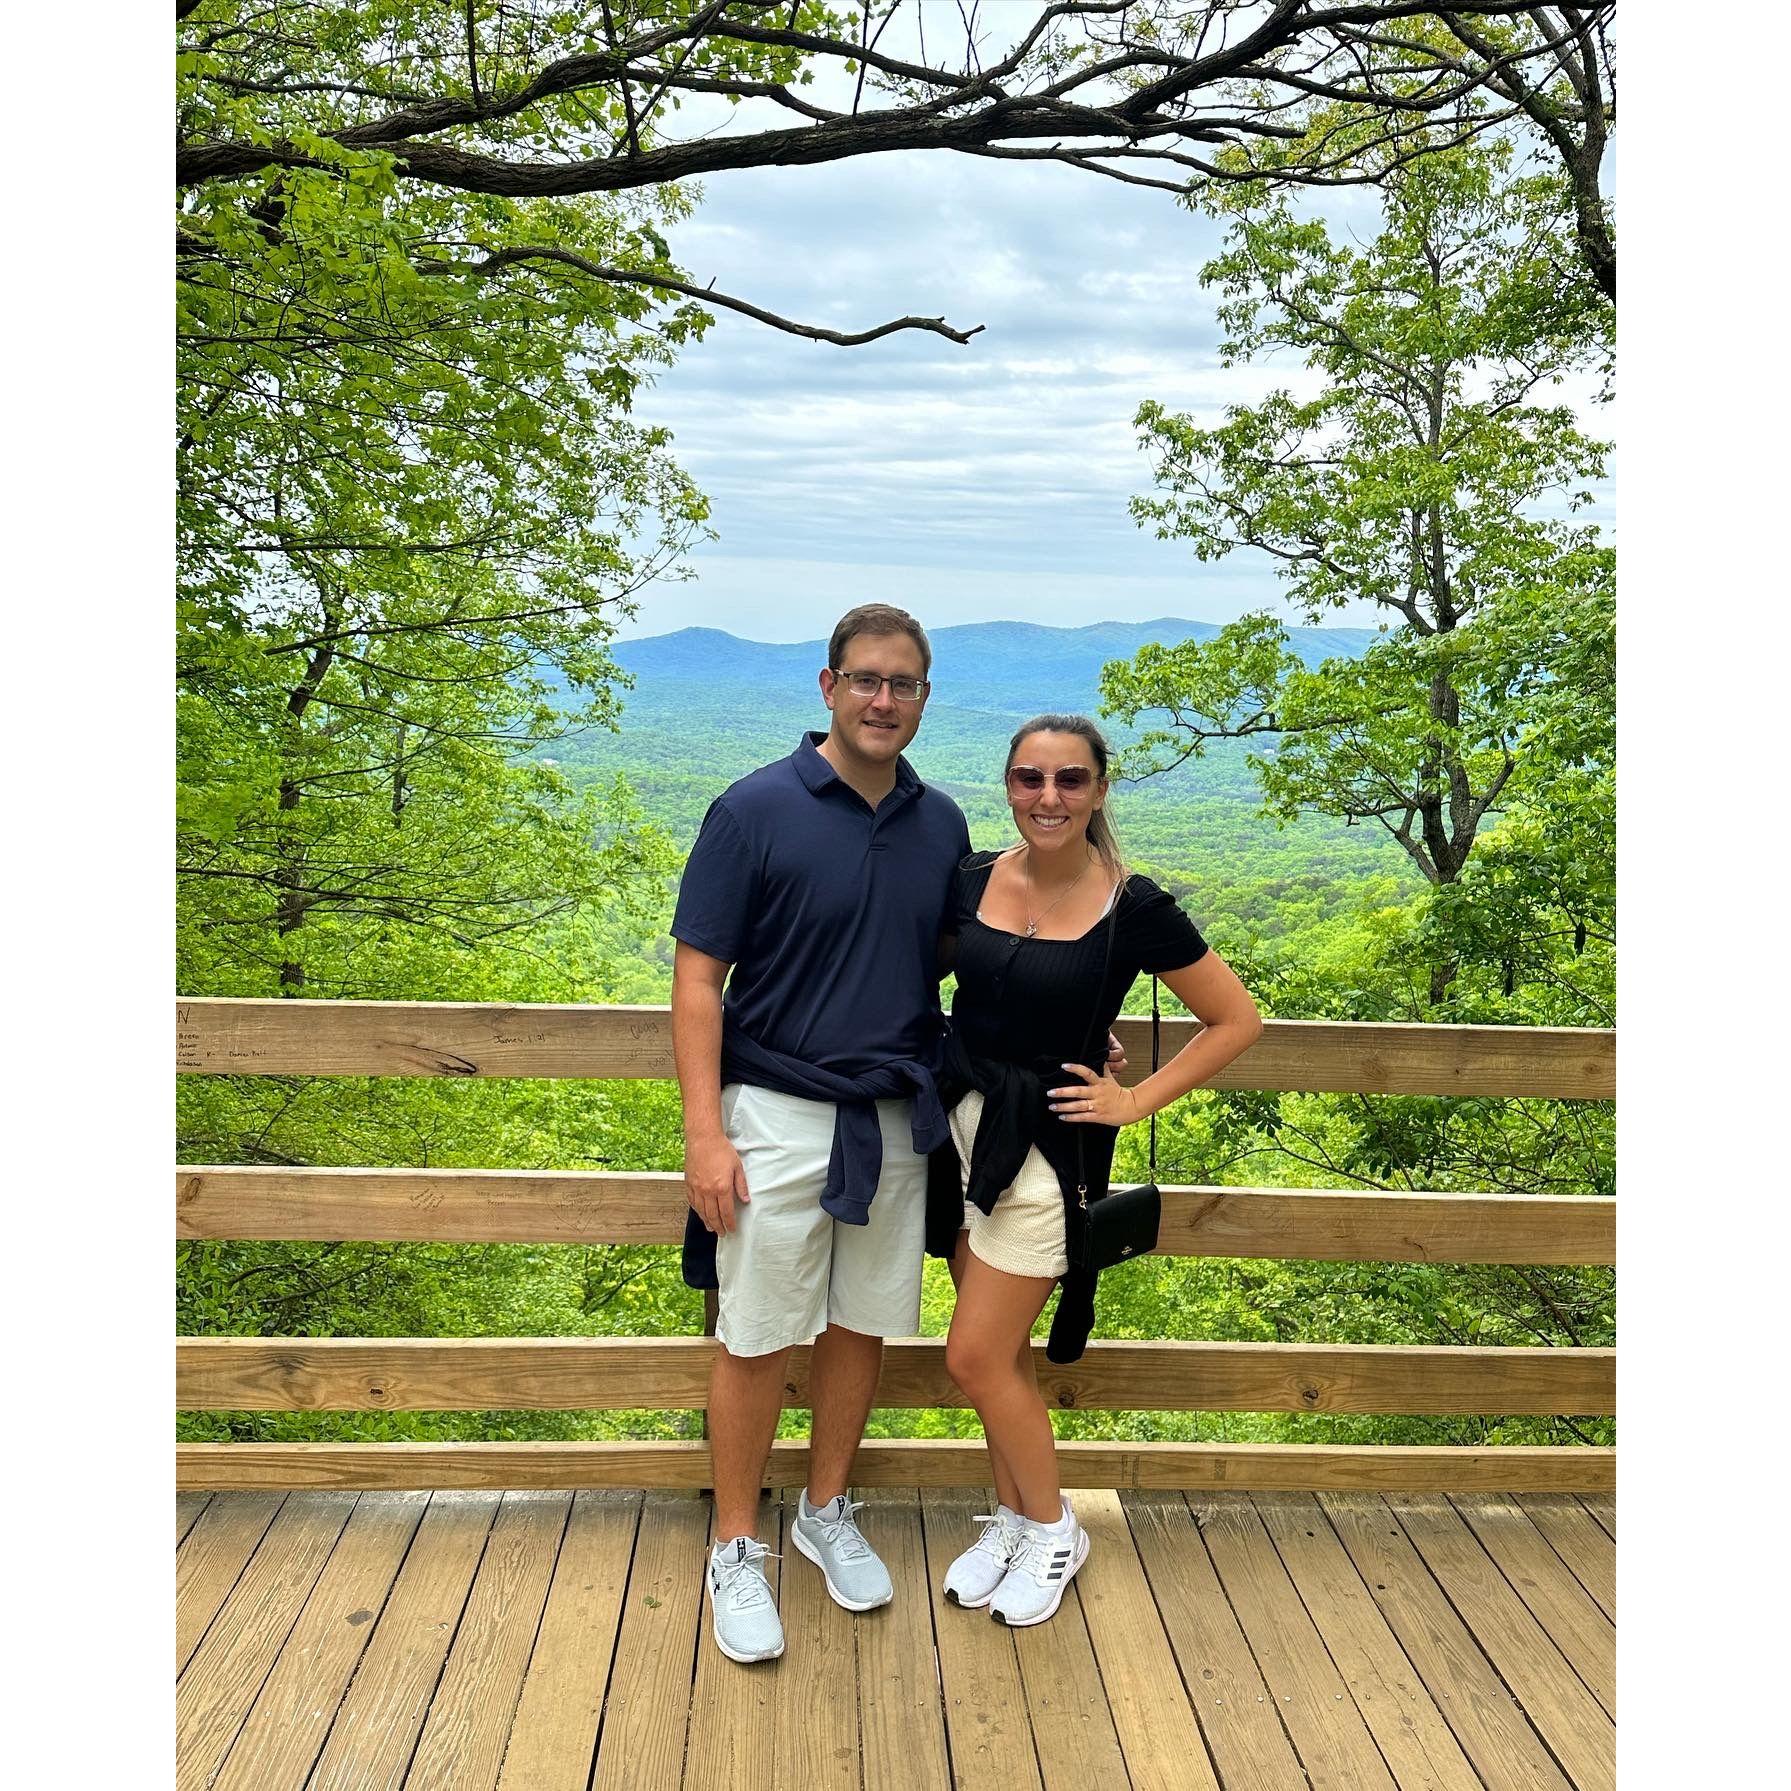 Fred and Jordan travel up to North Georgia for a dear friends wedding. During their visit, the two hike 600 steps to the top of Amicalola Falls, a first-time experience for Fred!